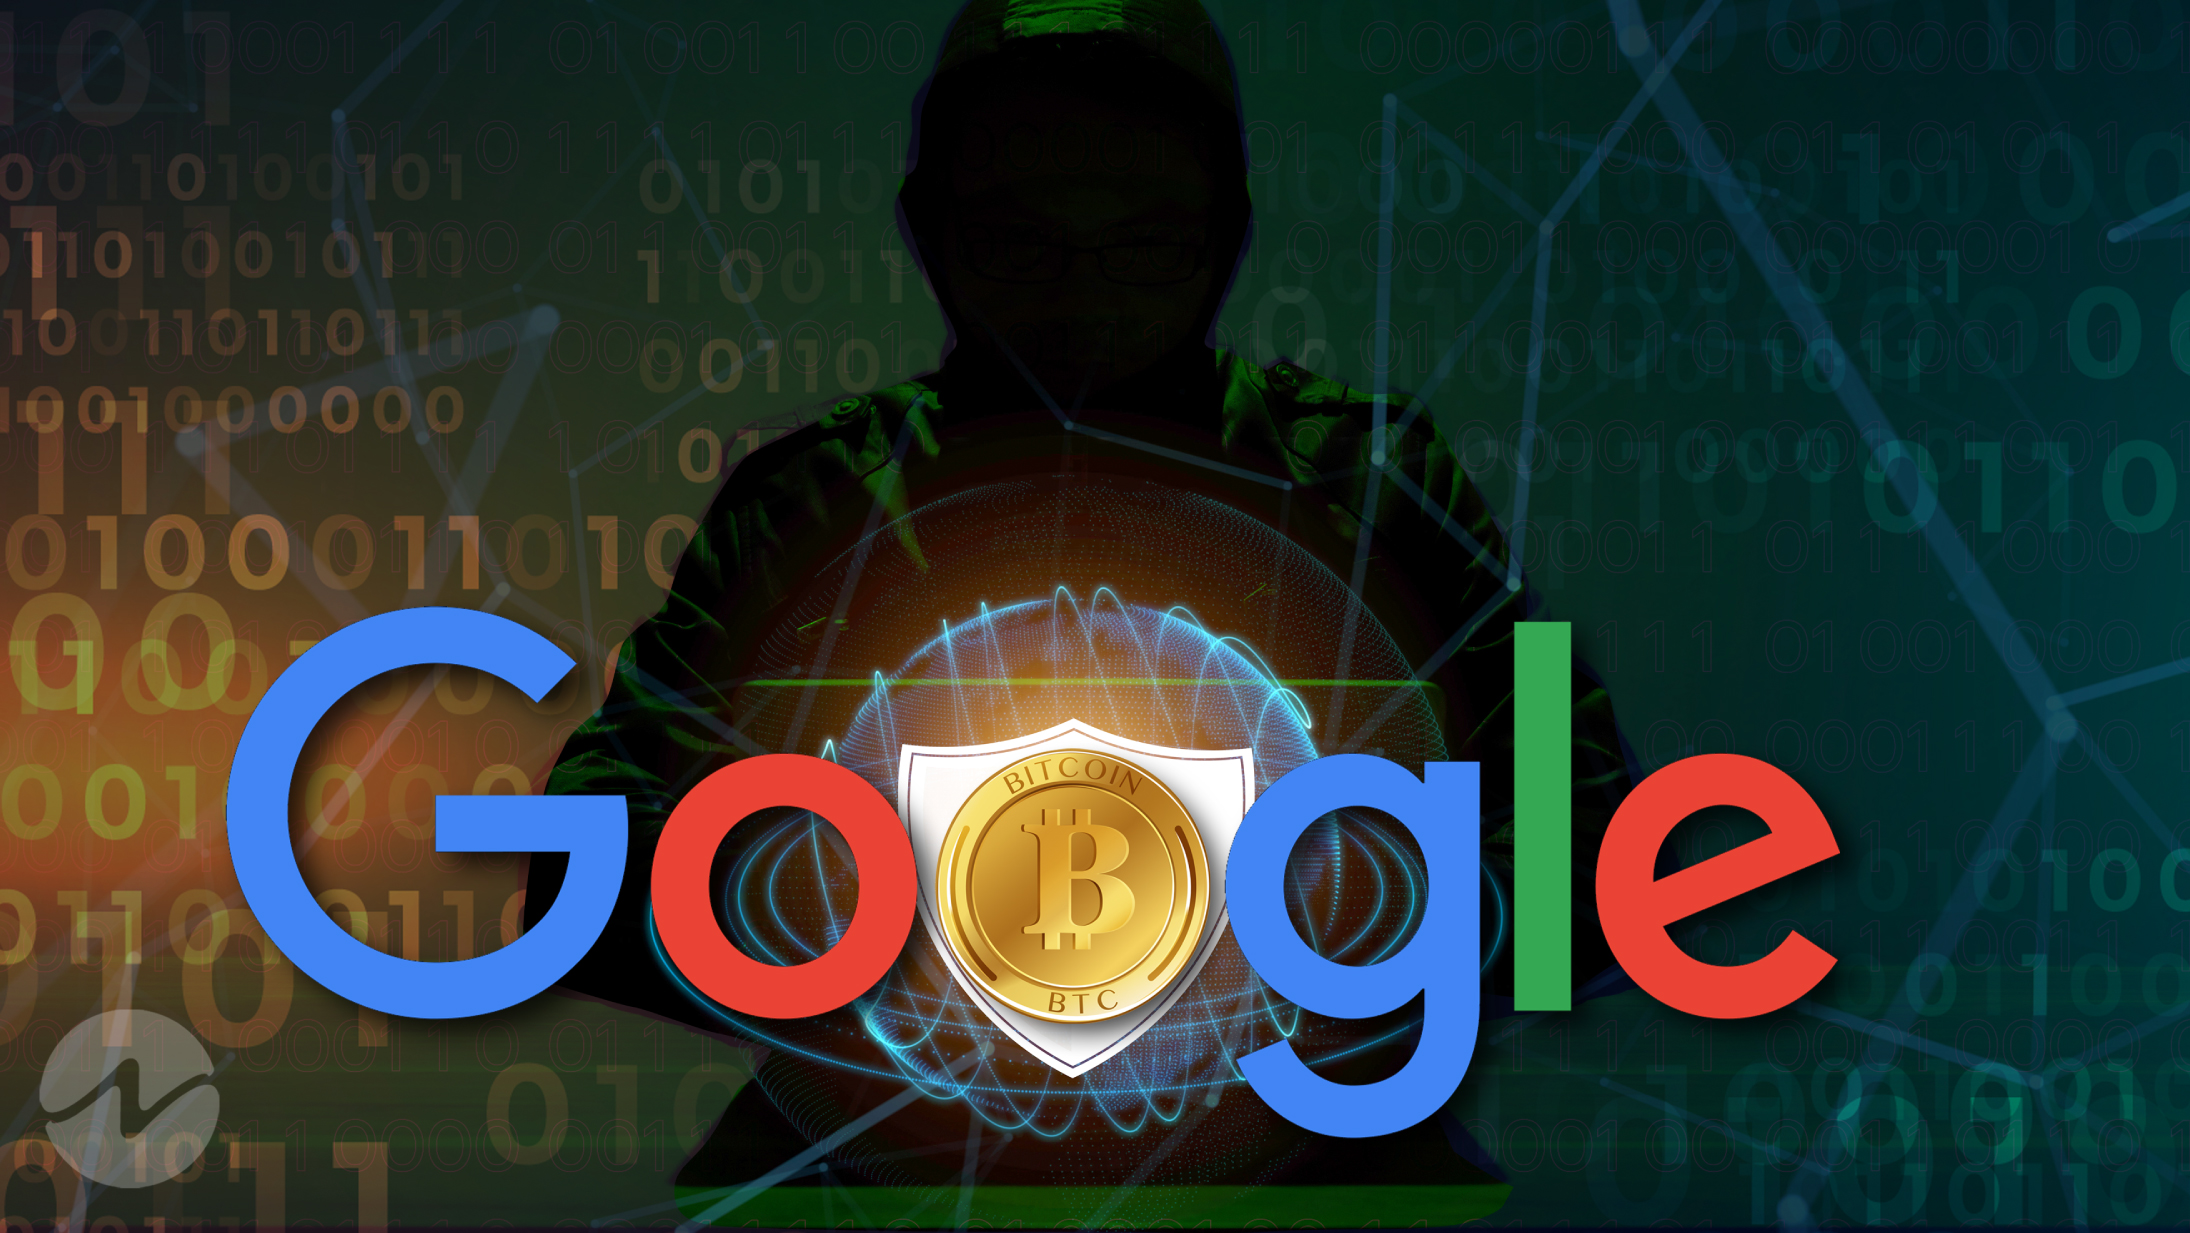 Compromised Google Cloud Accounts Used for Crypto Mining by Hackers